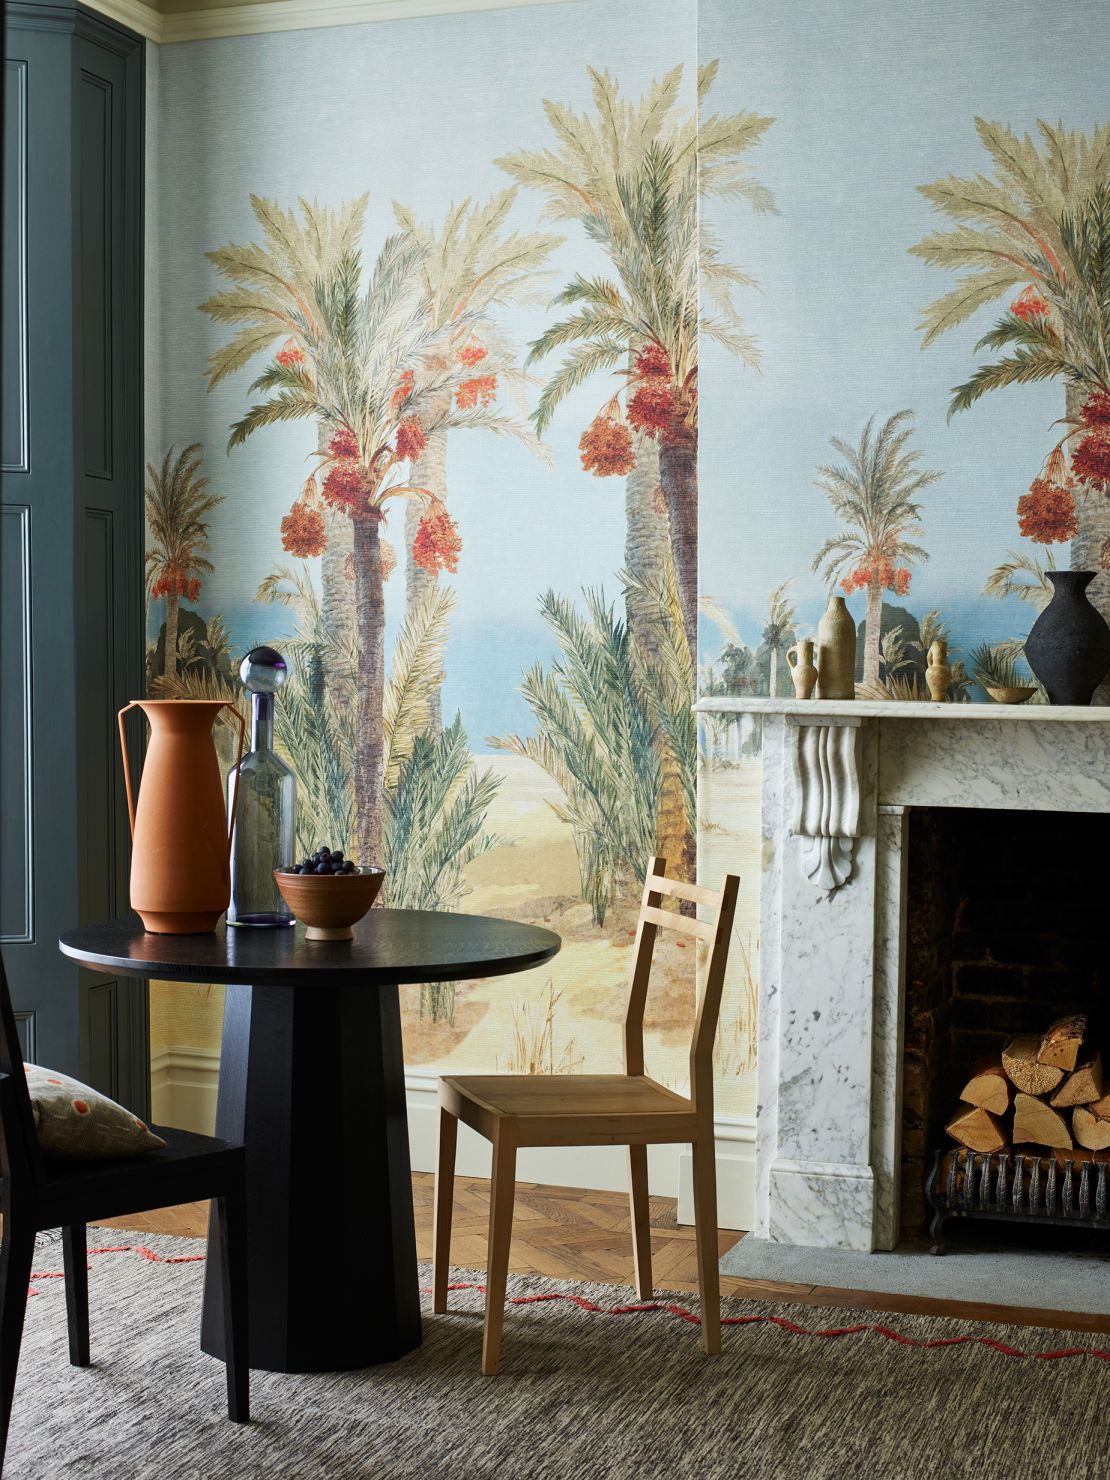 1838 Wallcovering's "Date Palm Mural" was inspired by another V&A archive piece by Elijah Walton who took inspiration from travels to Egypt in the 1860s.  